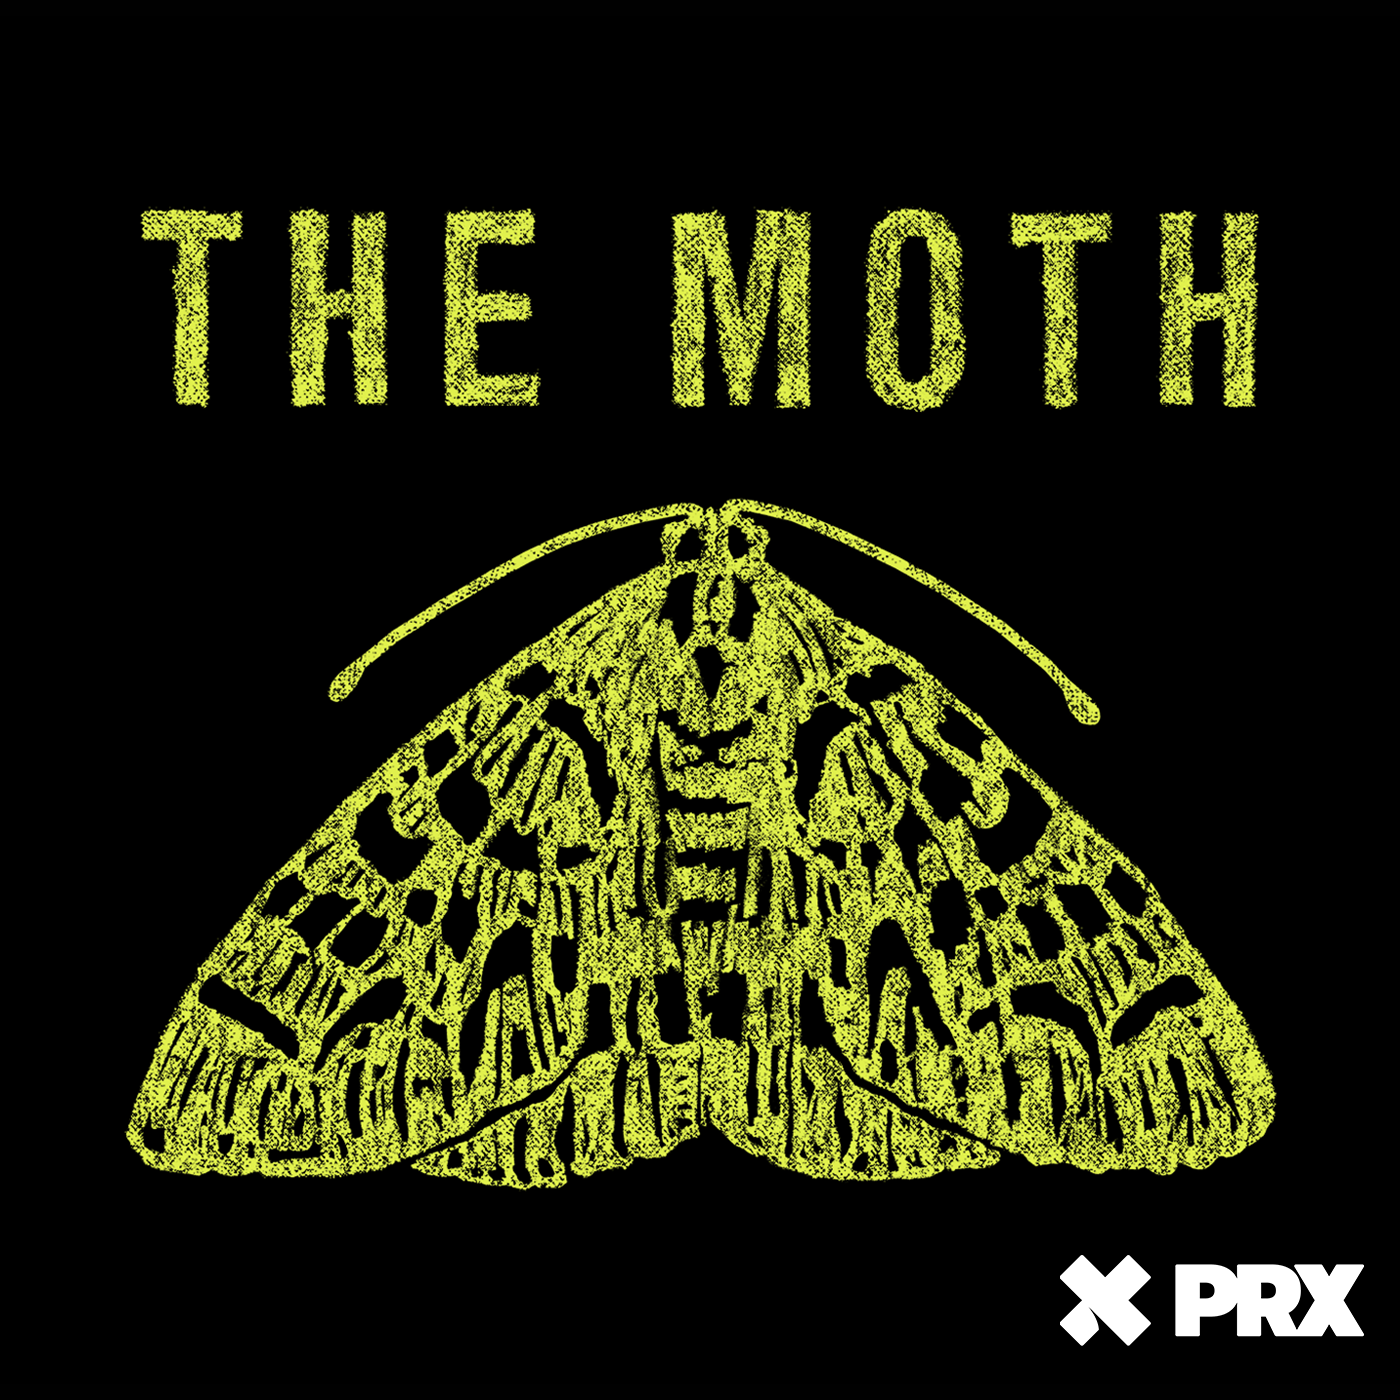 The Moth Radio Hour: Other People's Shoes